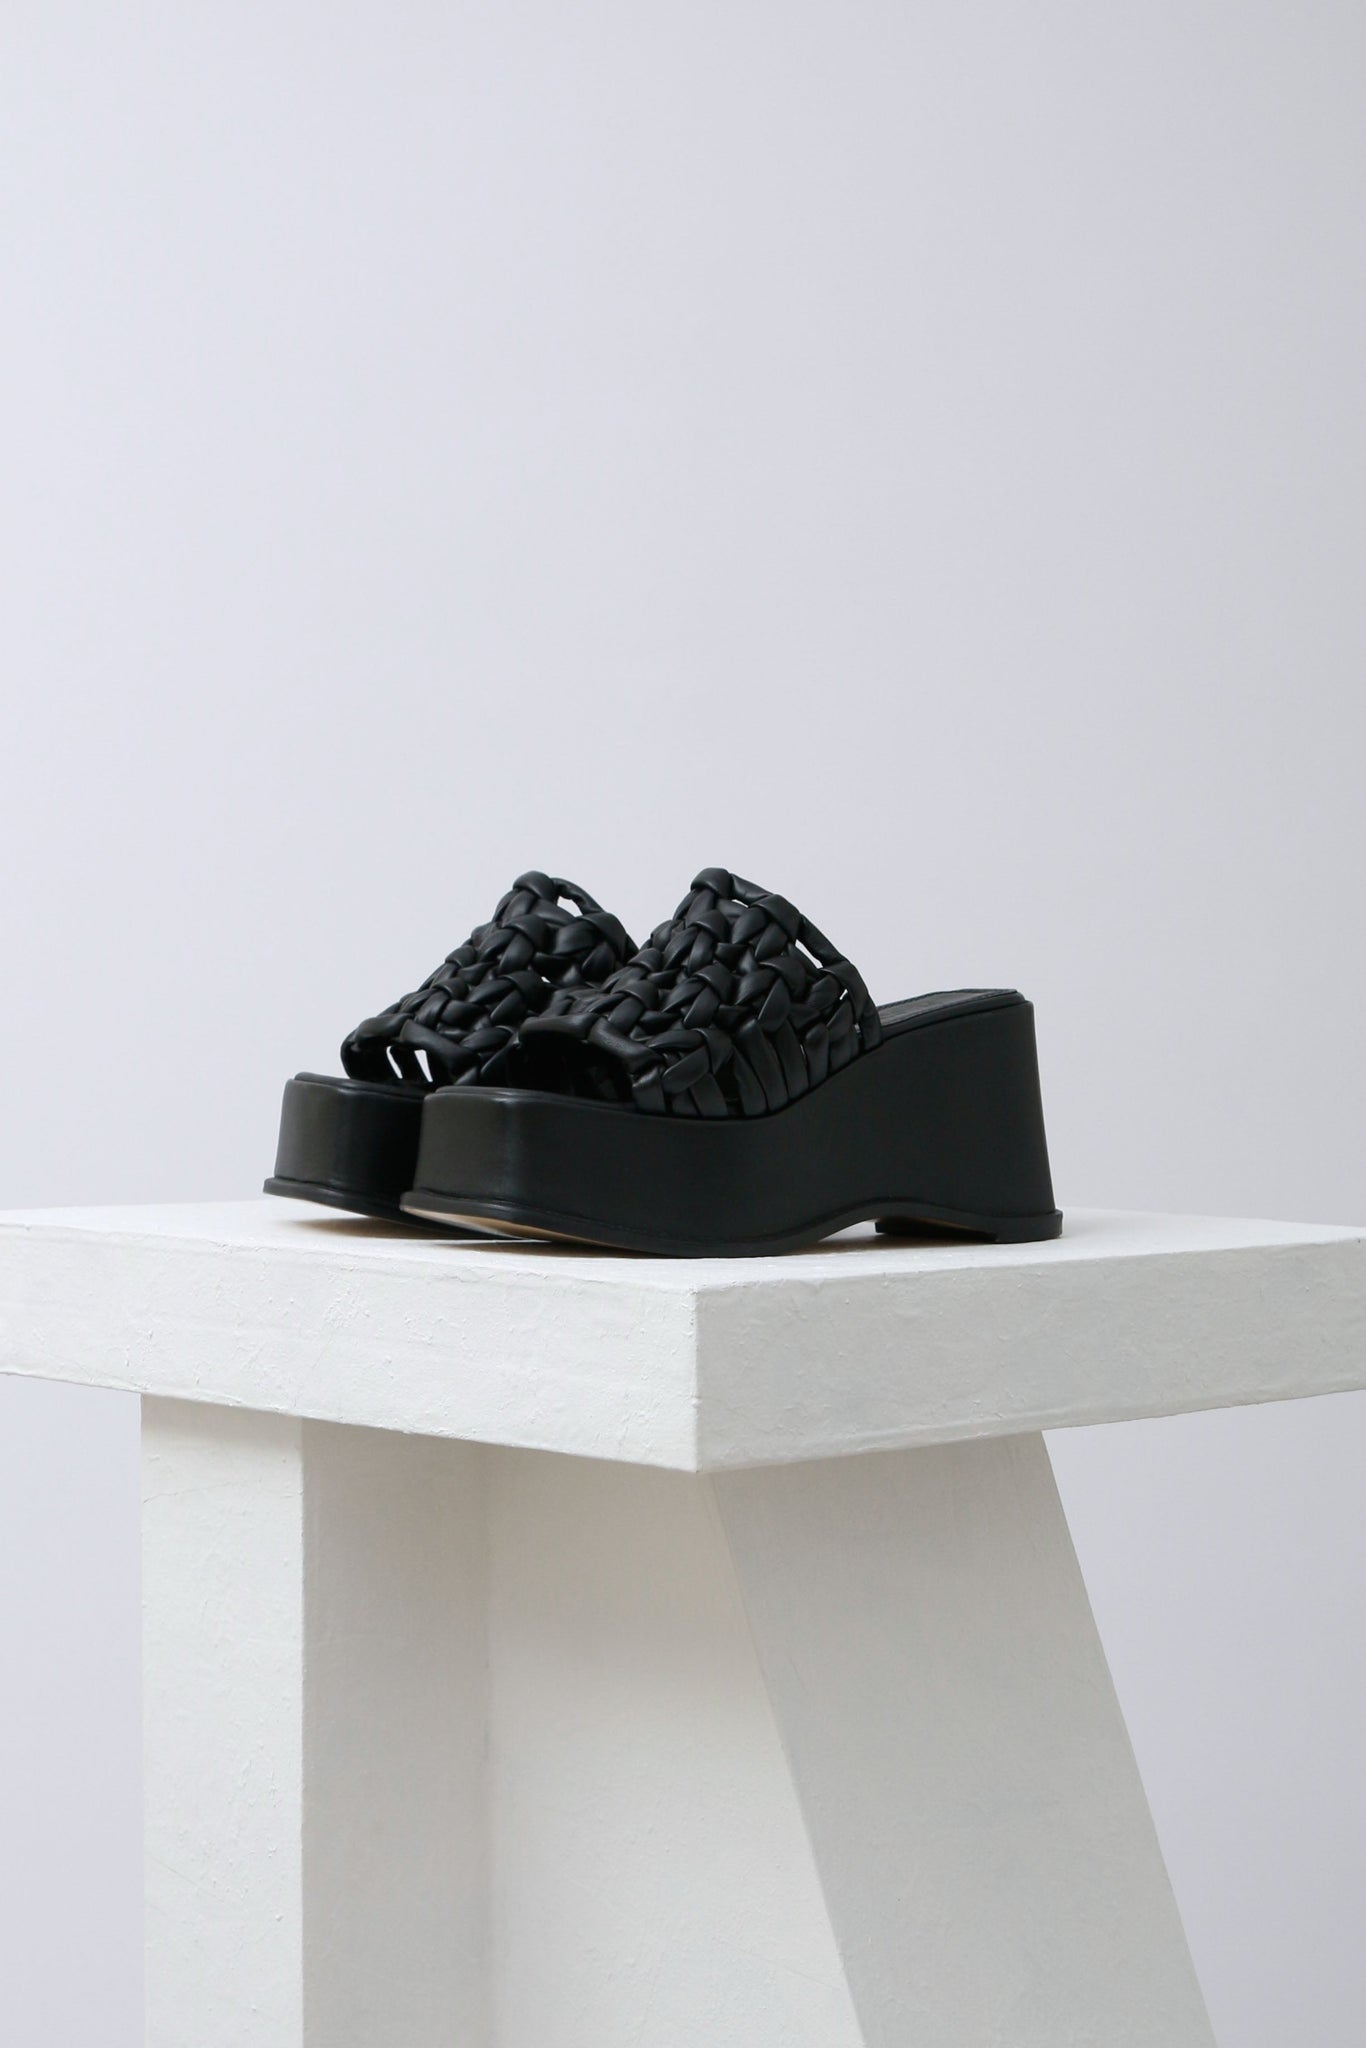 ARMADA - Black Puffed Woven Leather Sandals